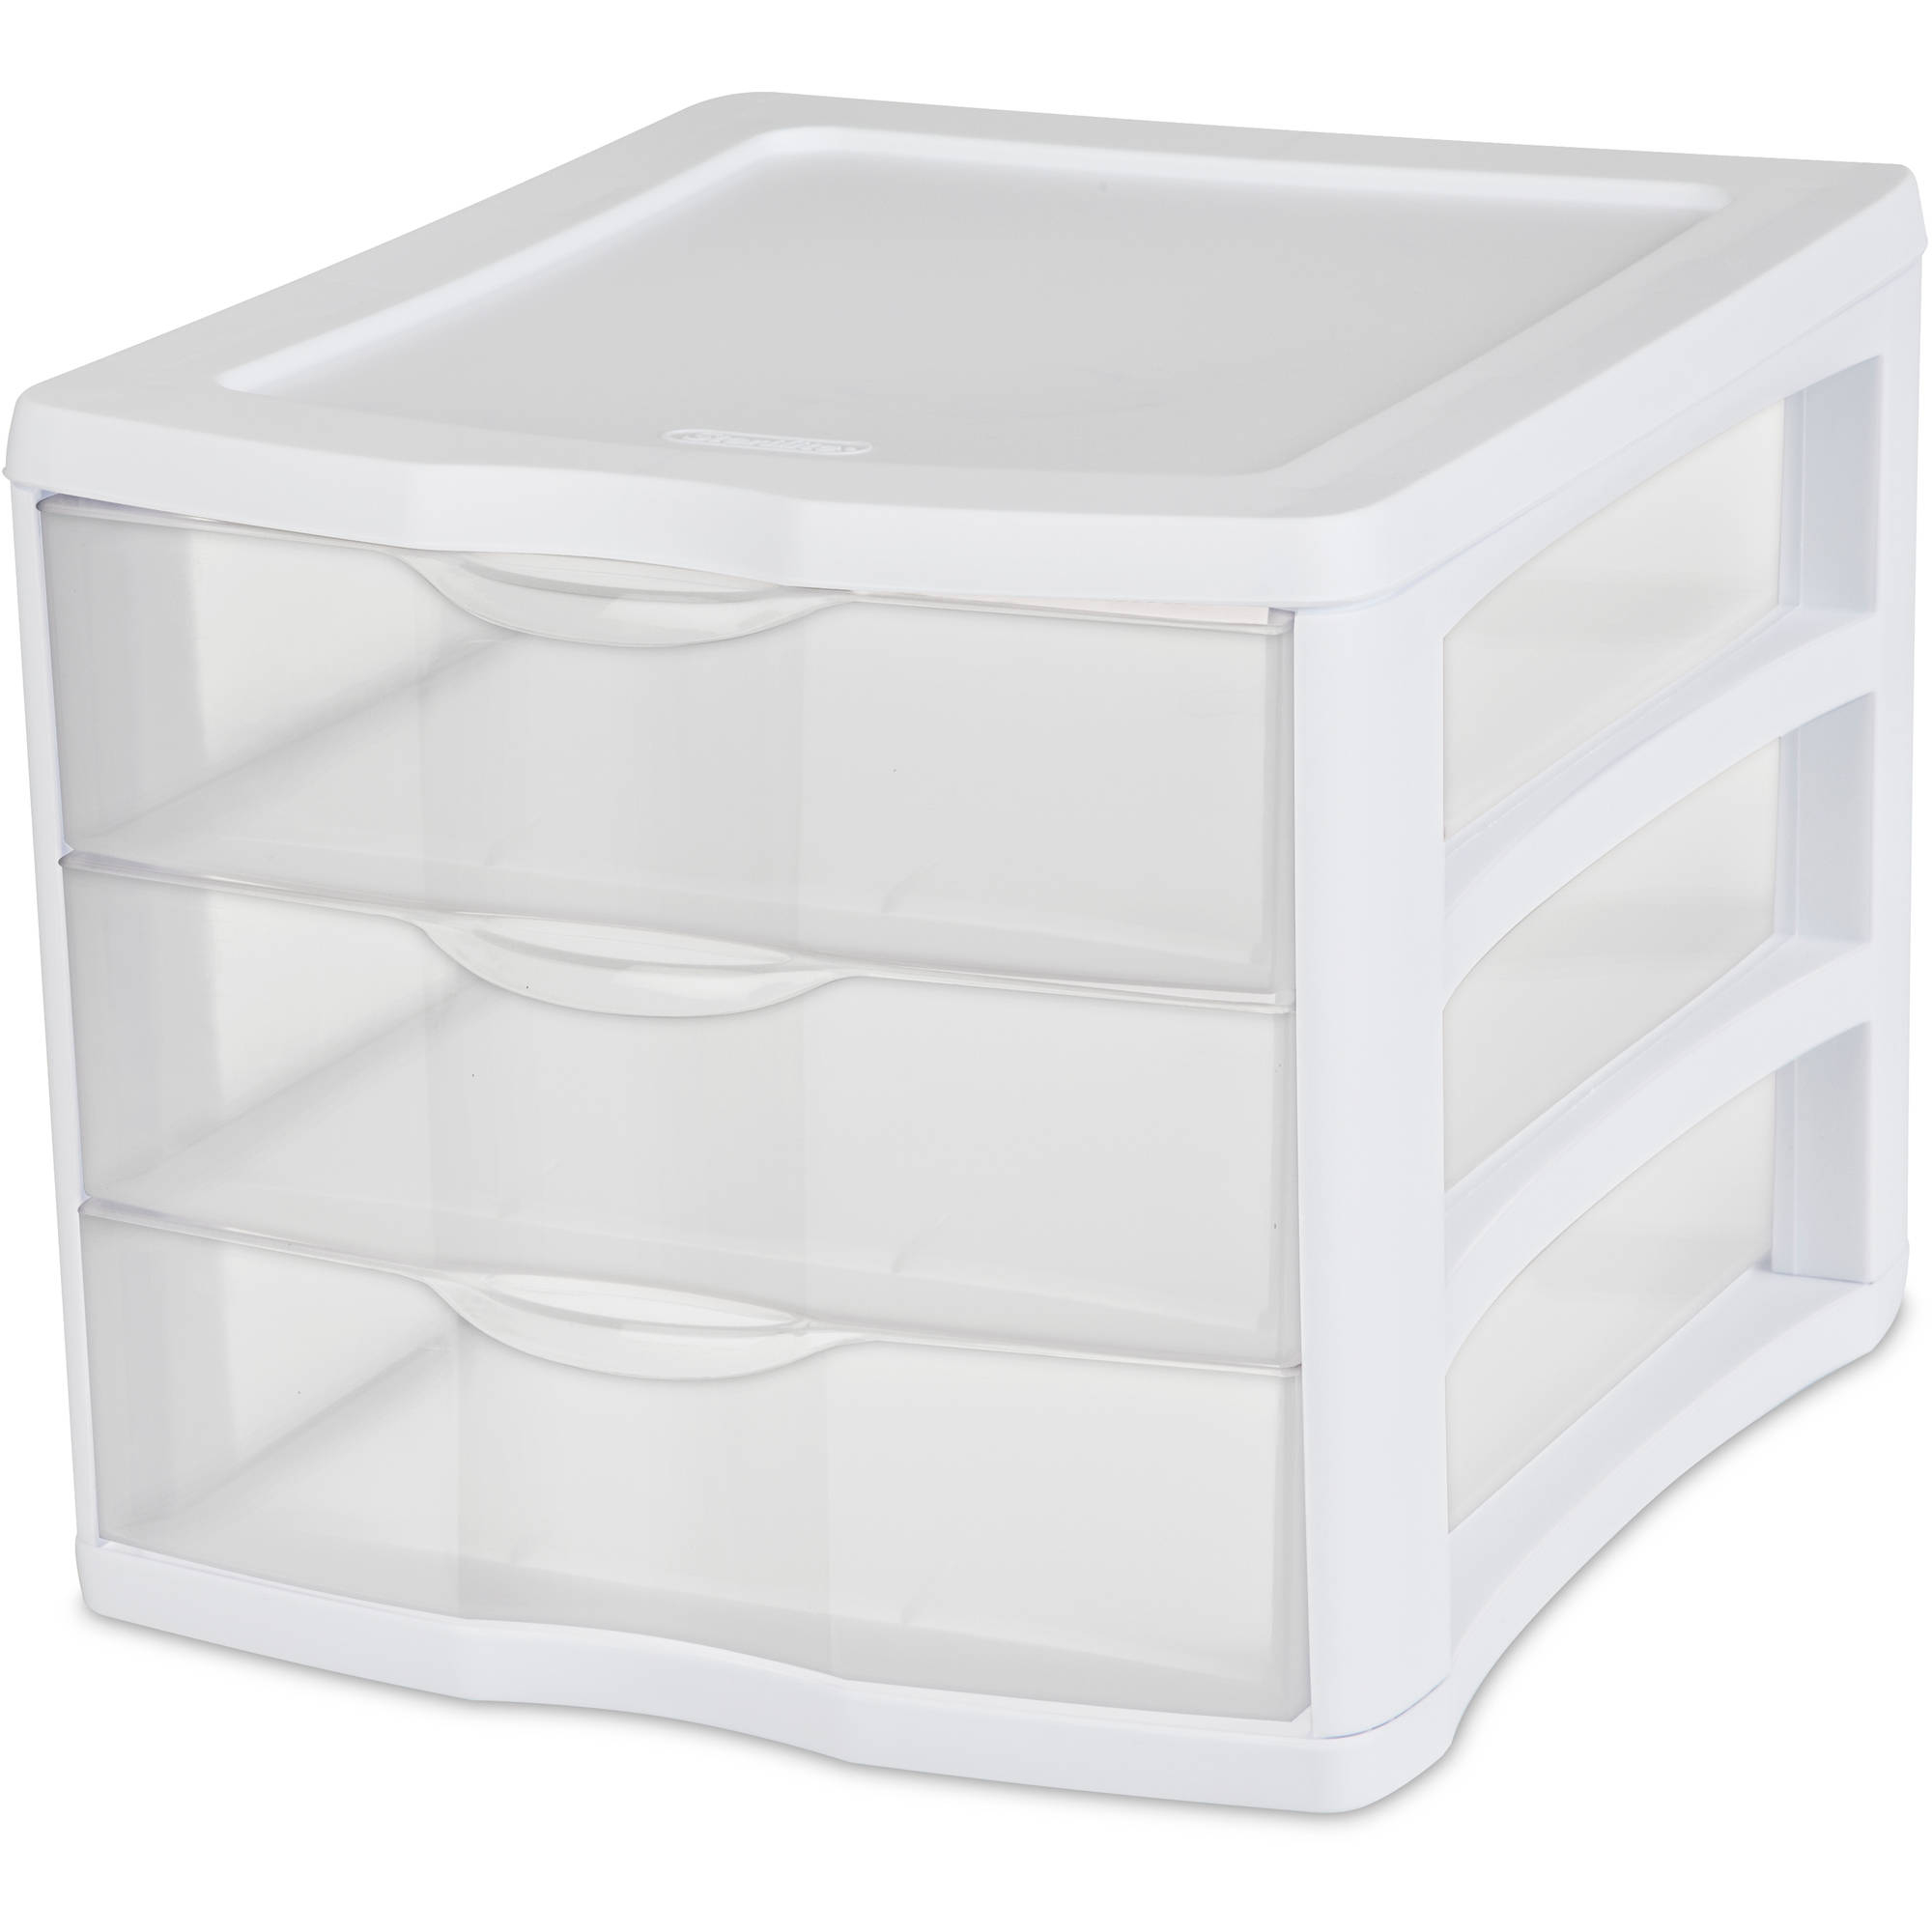 Plastic Storage Bins With Drawers On Wheels Storage Ideas for dimensions 2000 X 2000